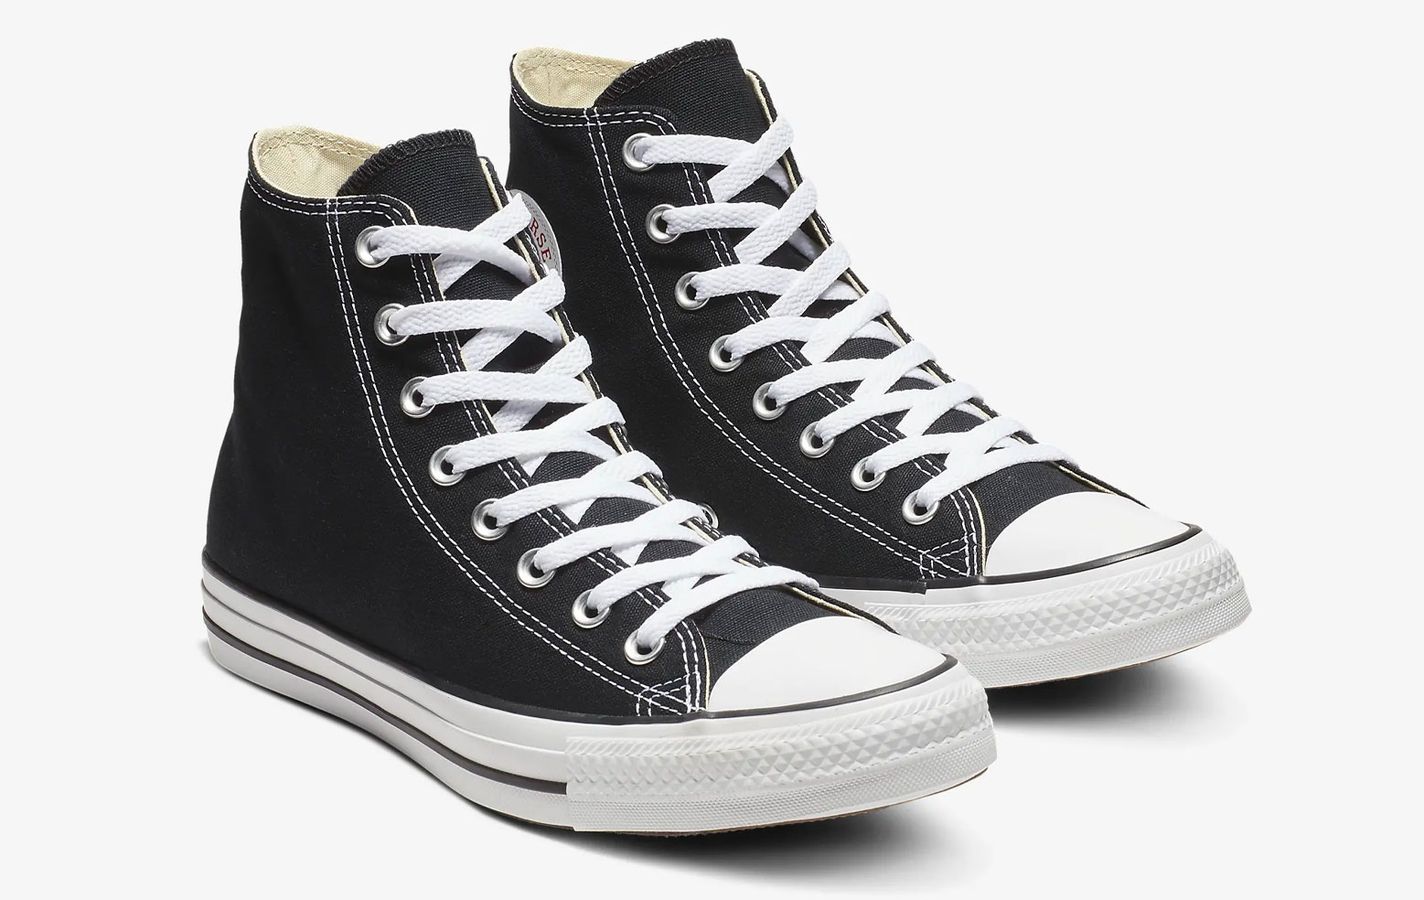 Converse vs Vans: What's the difference?